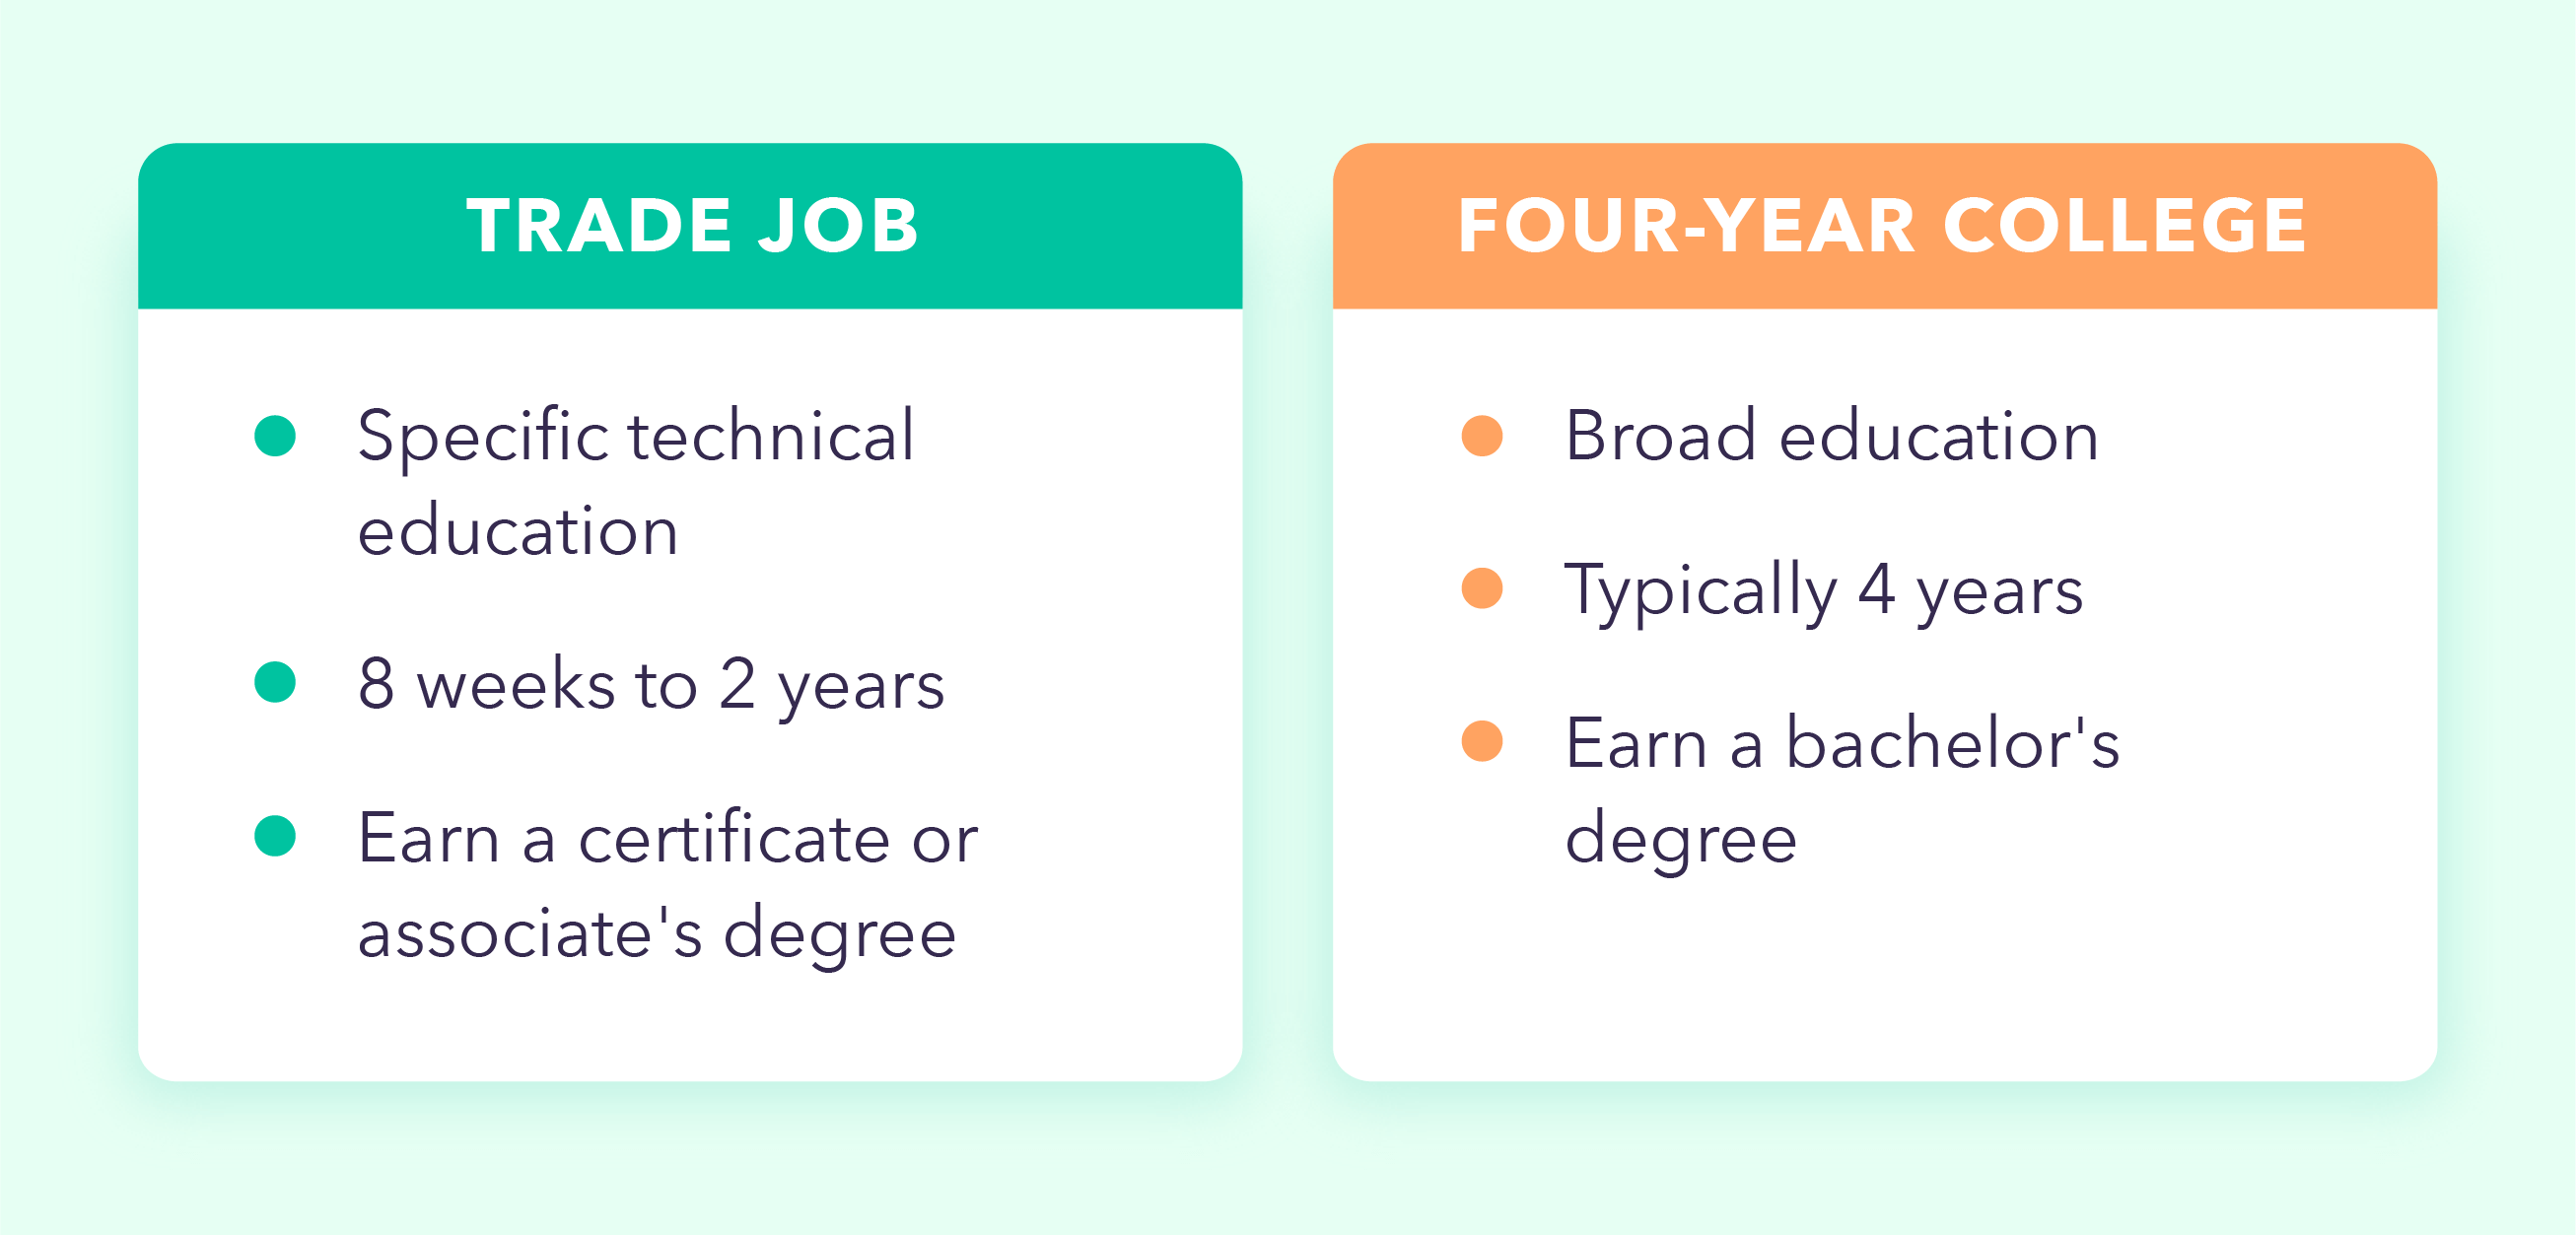 A graphic explains the difference between pursuing trade jobs and a four-year college